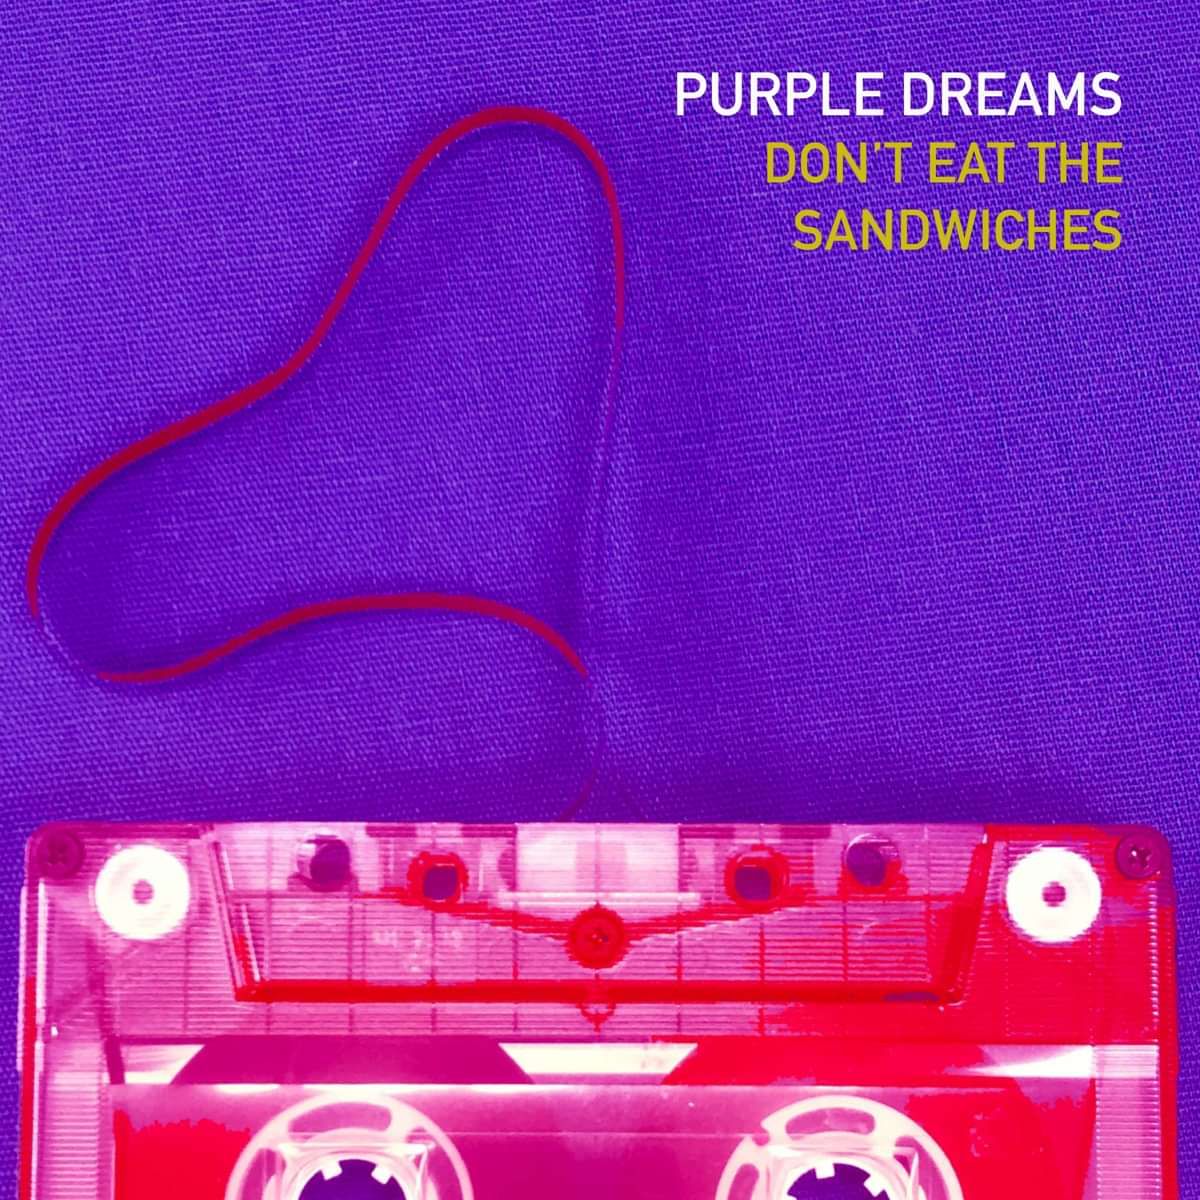 Purple Dreams - Don't Eat The Sandwiches HQ Digital Download and Digital Poster **NEW for JAN 2022** - nathan timothy*